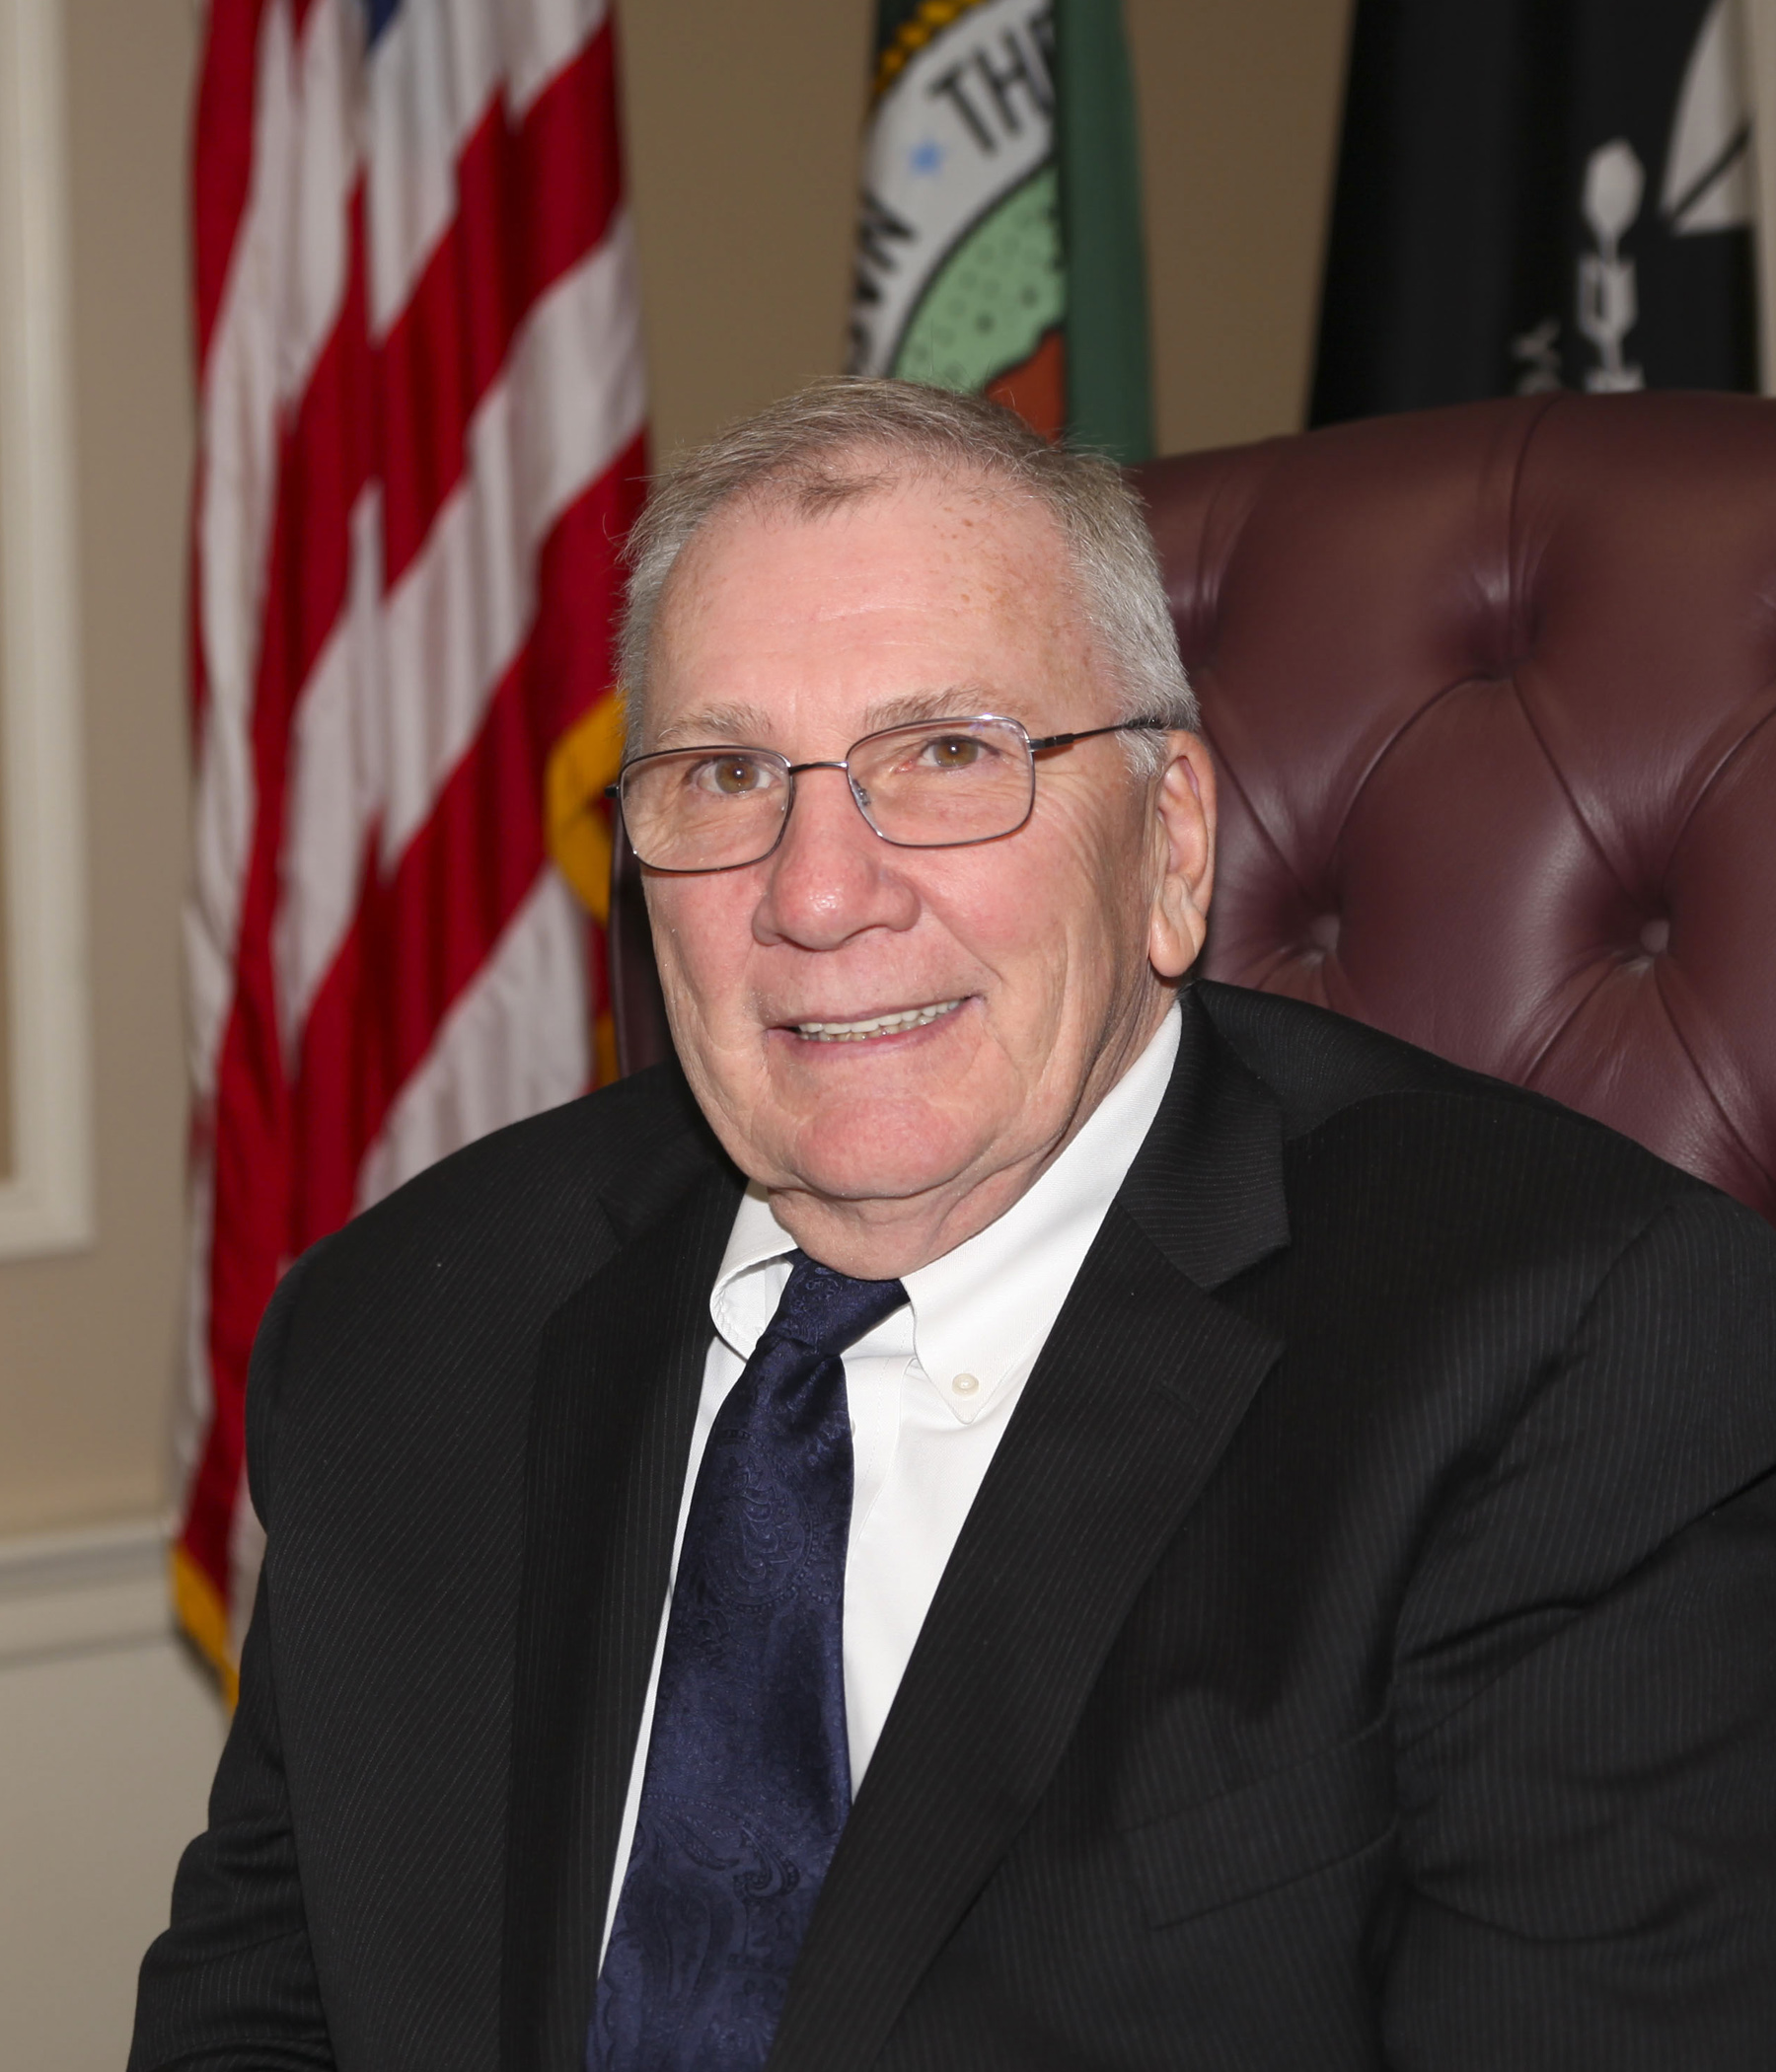 Richard Baker is the town's new highway superintendent. (Photo courtesy of the Town of North Hempstead)